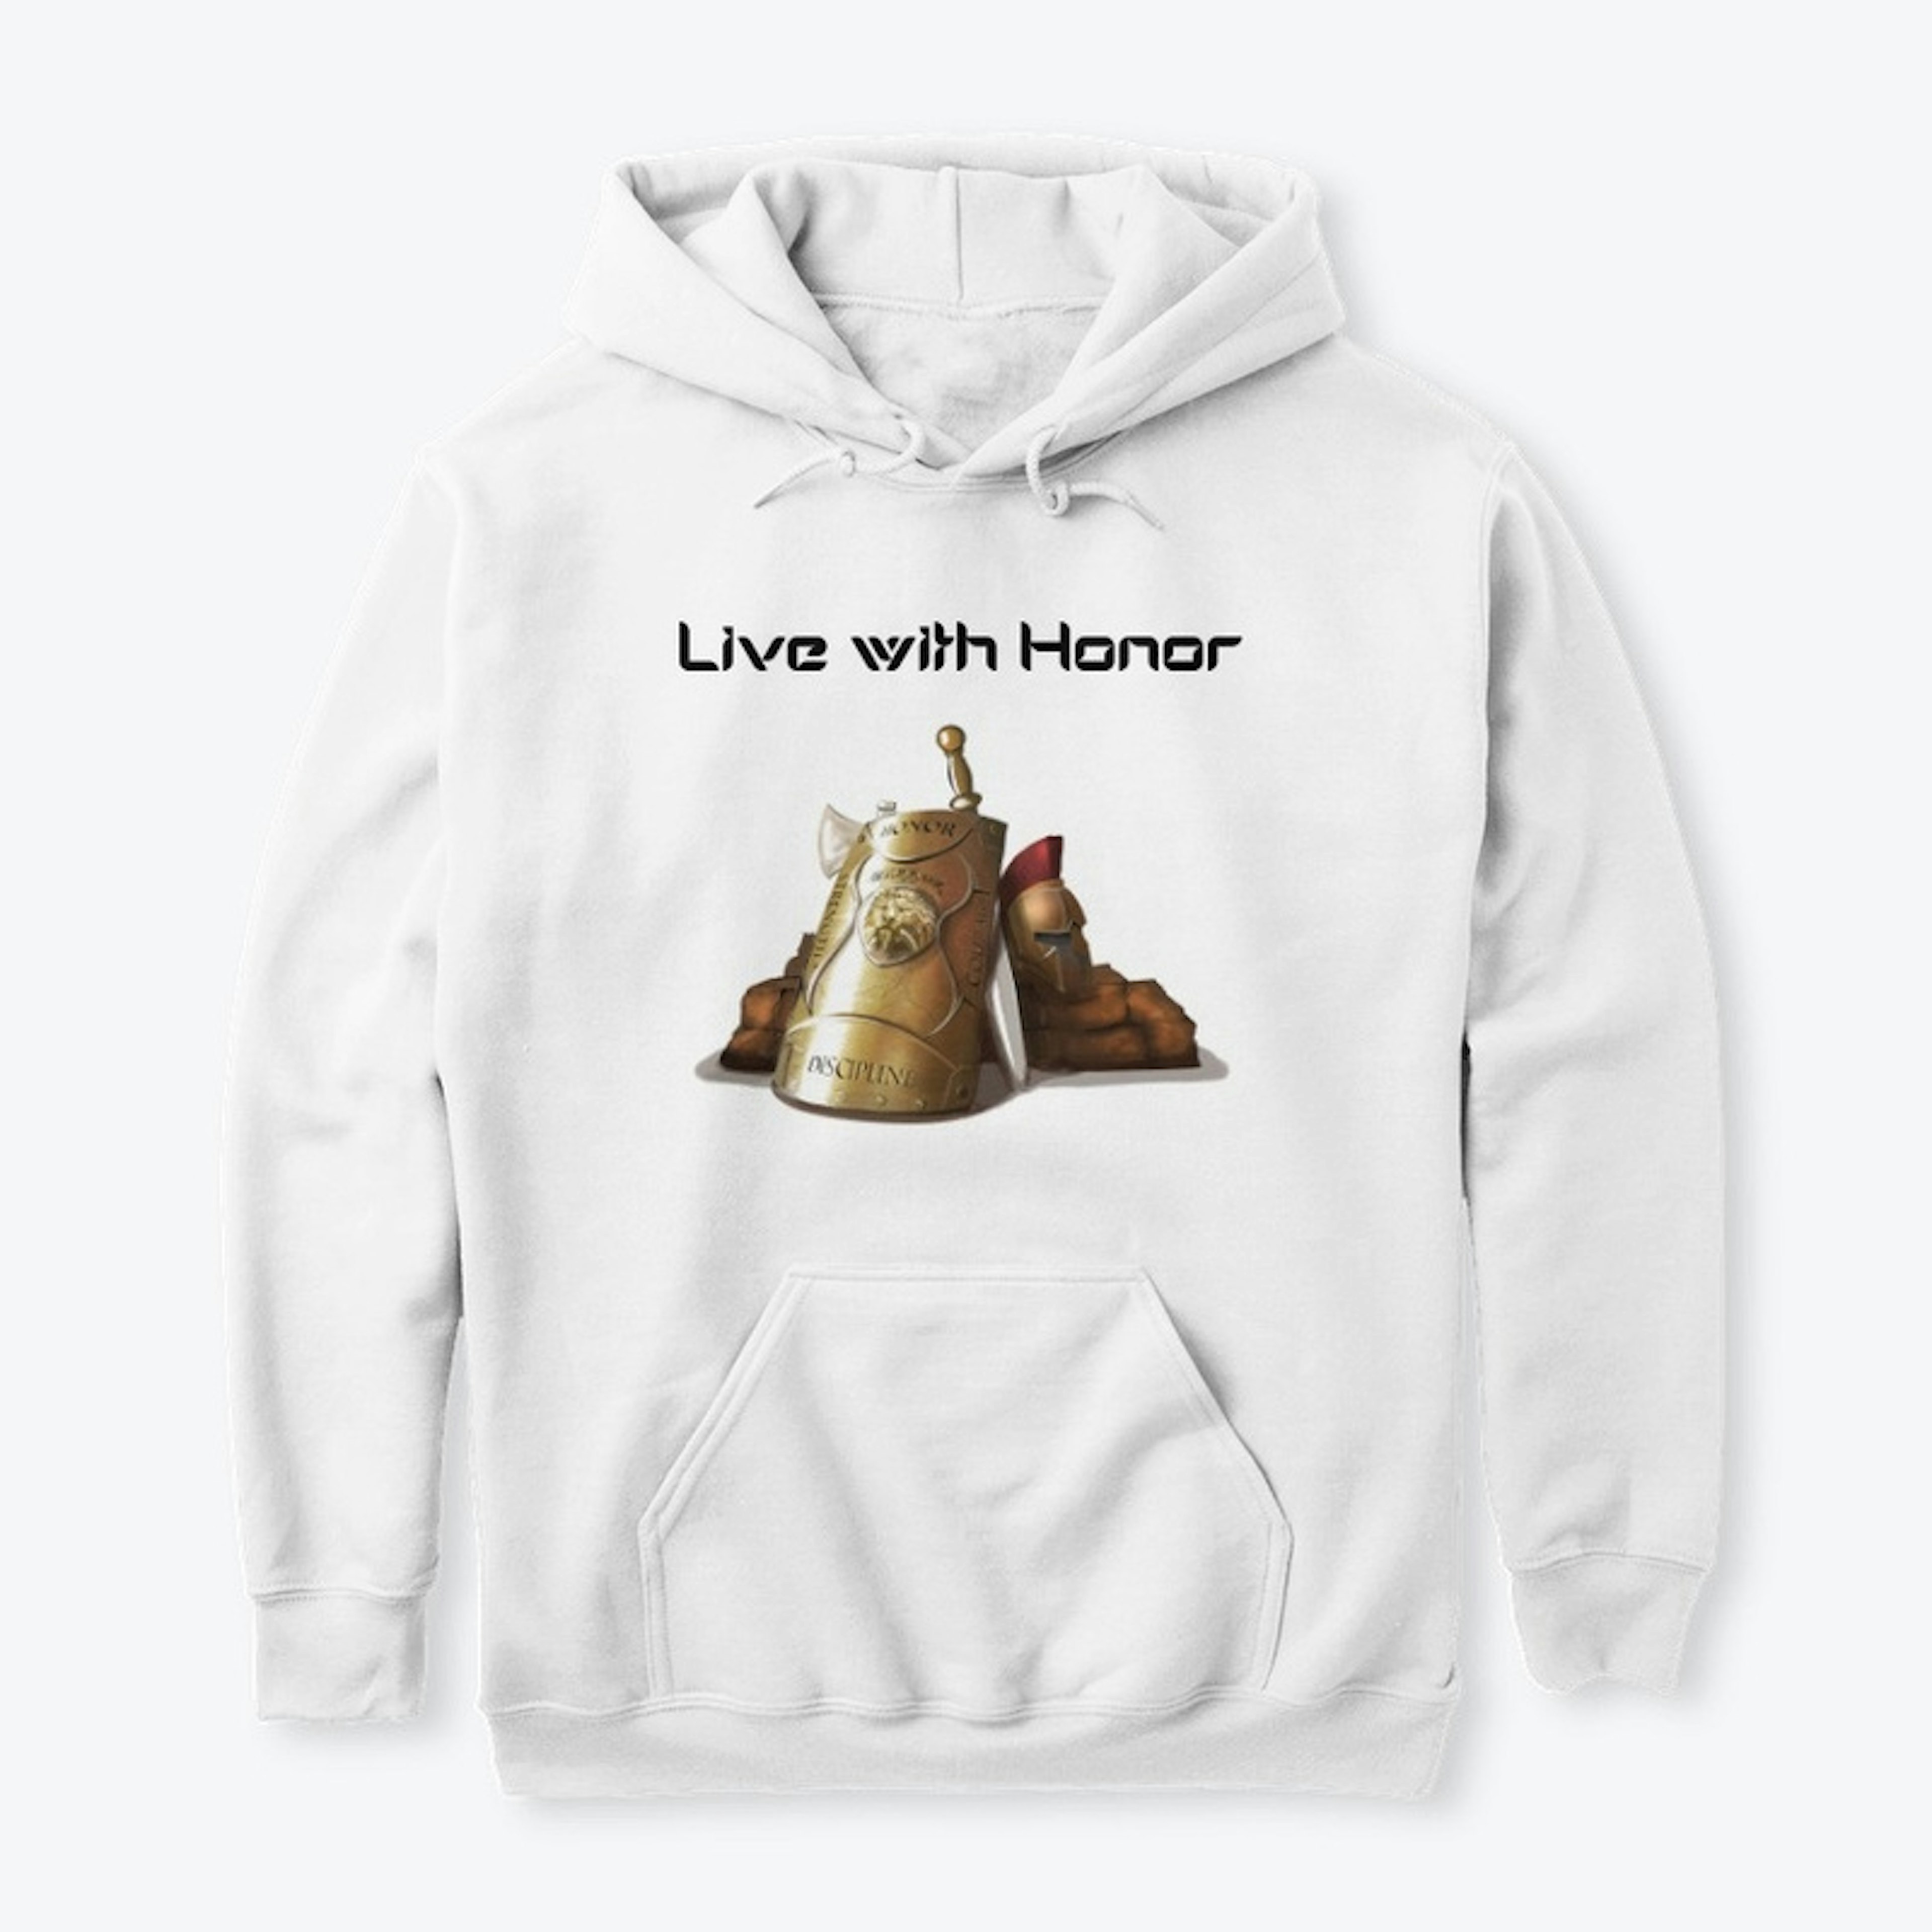 Live with honor (black lettering)